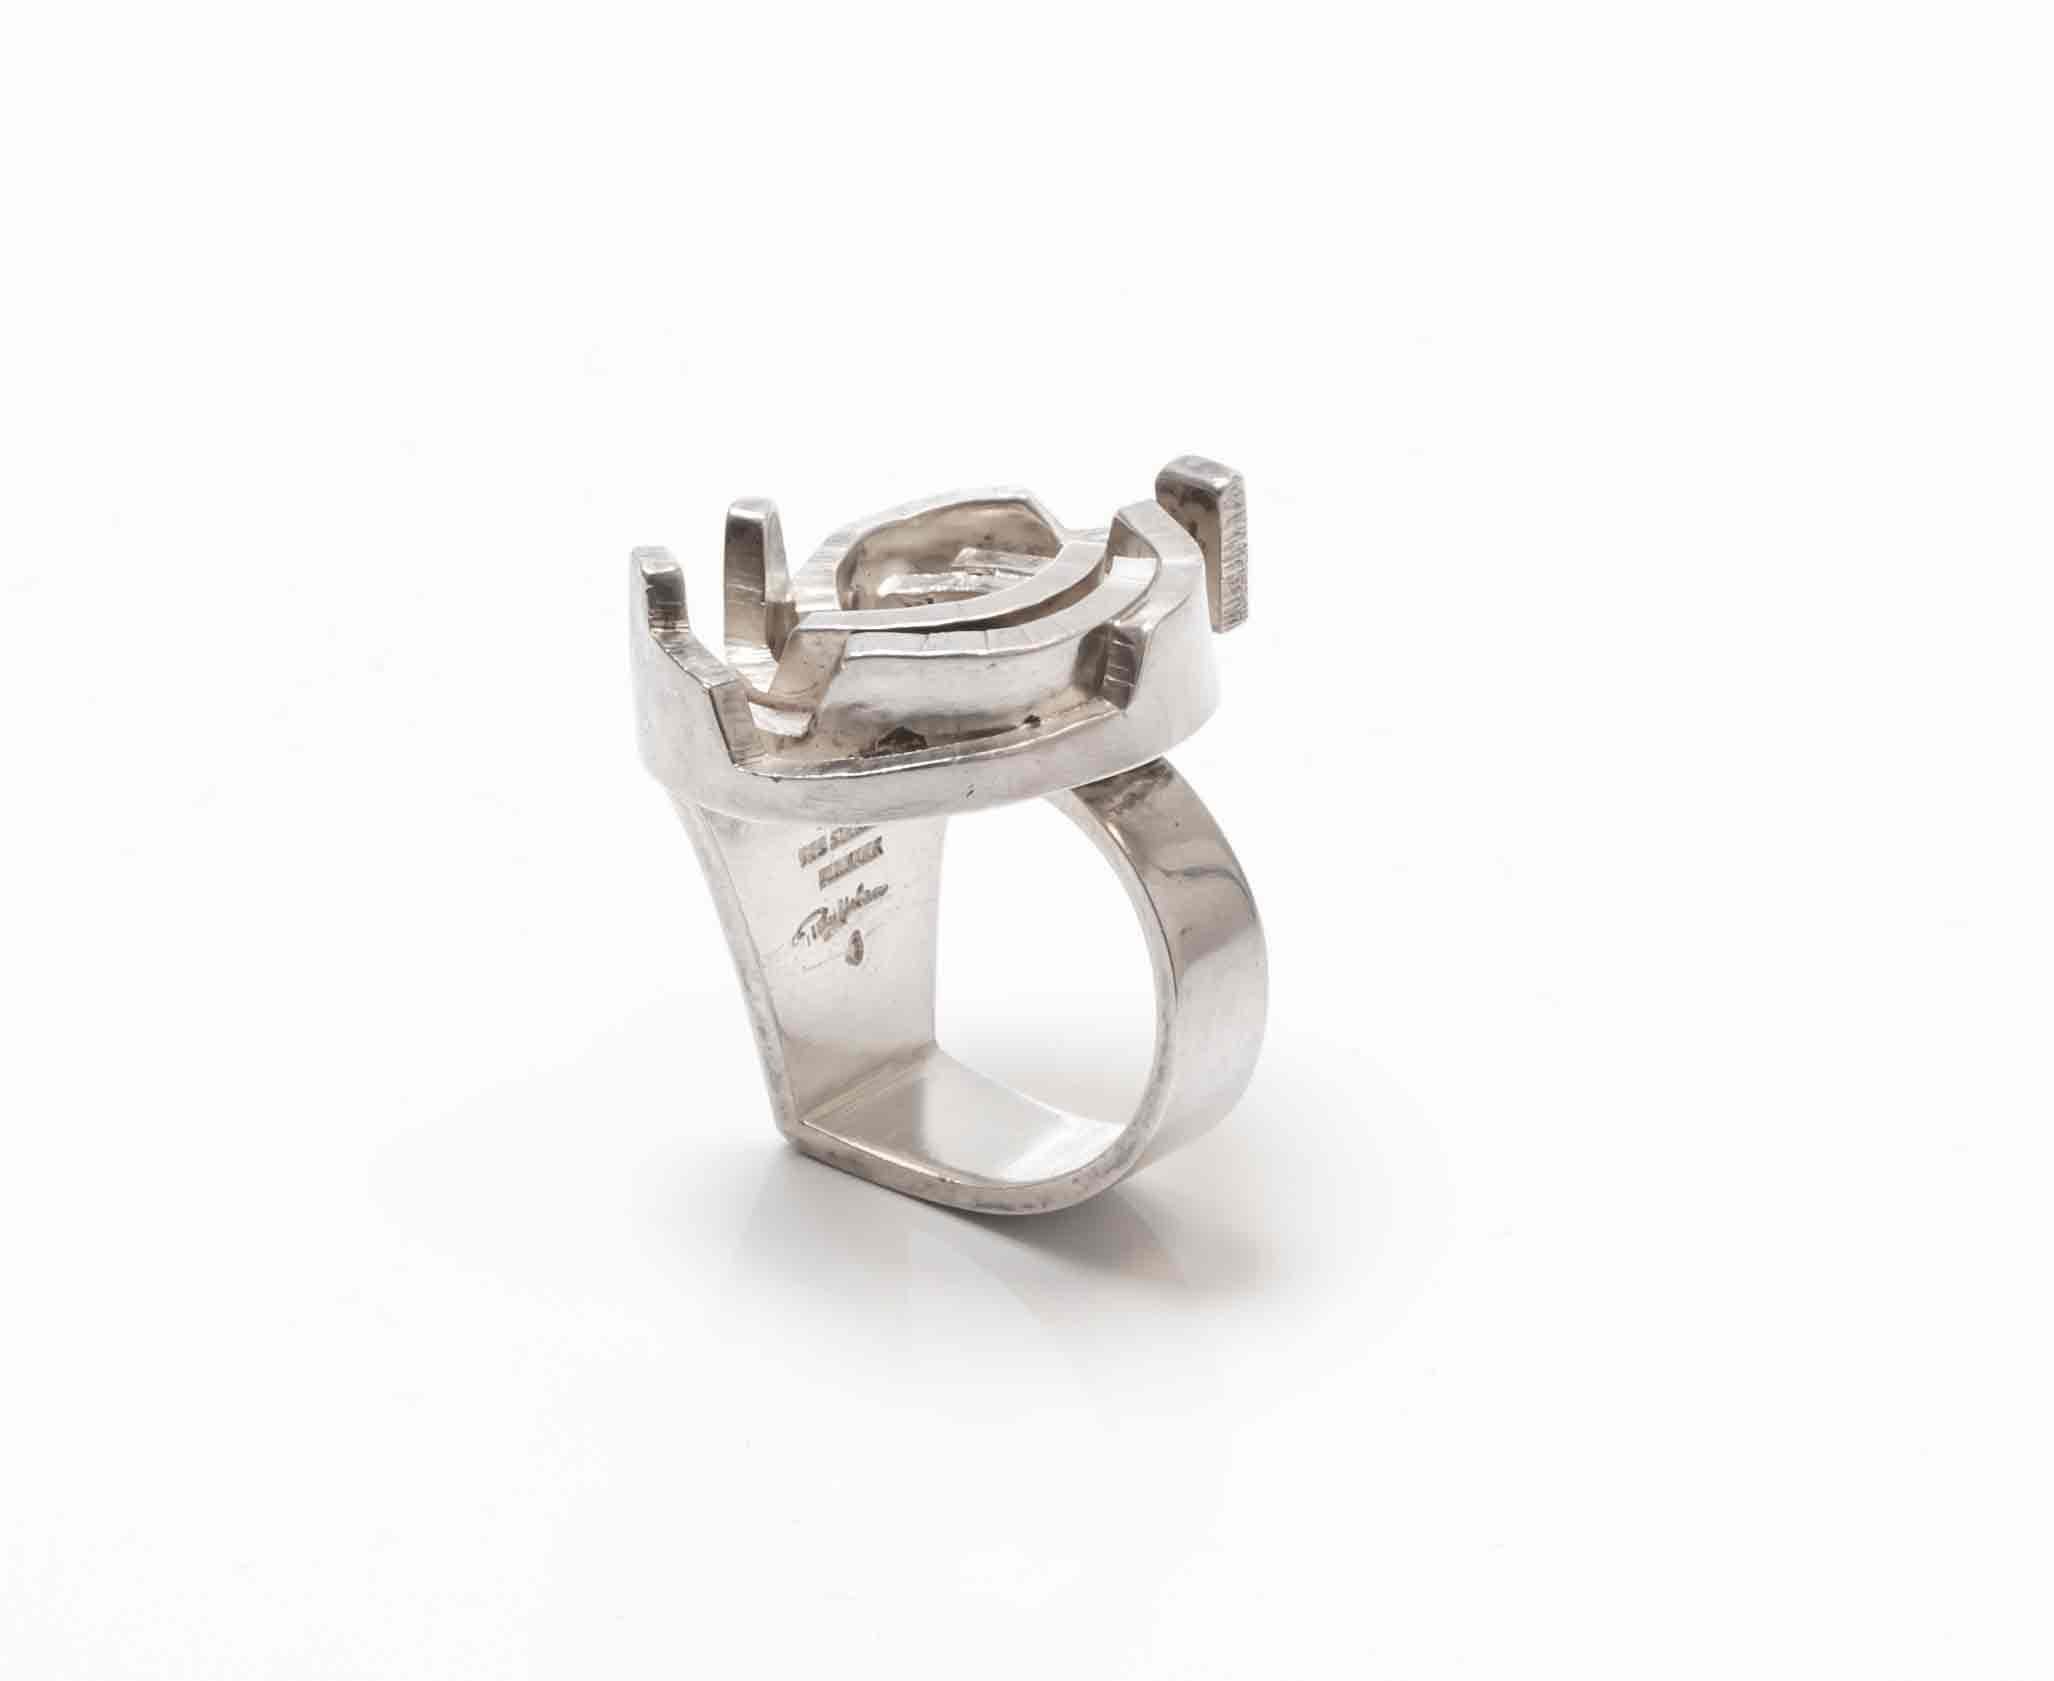 Sculptural and very rare silver ring by Rey Urban. Designed and made in Denmark for juwelier Age Fausing, cirka 1960s second half. The ring is in excellent vintage condition. 

The ring size is 55 (m)